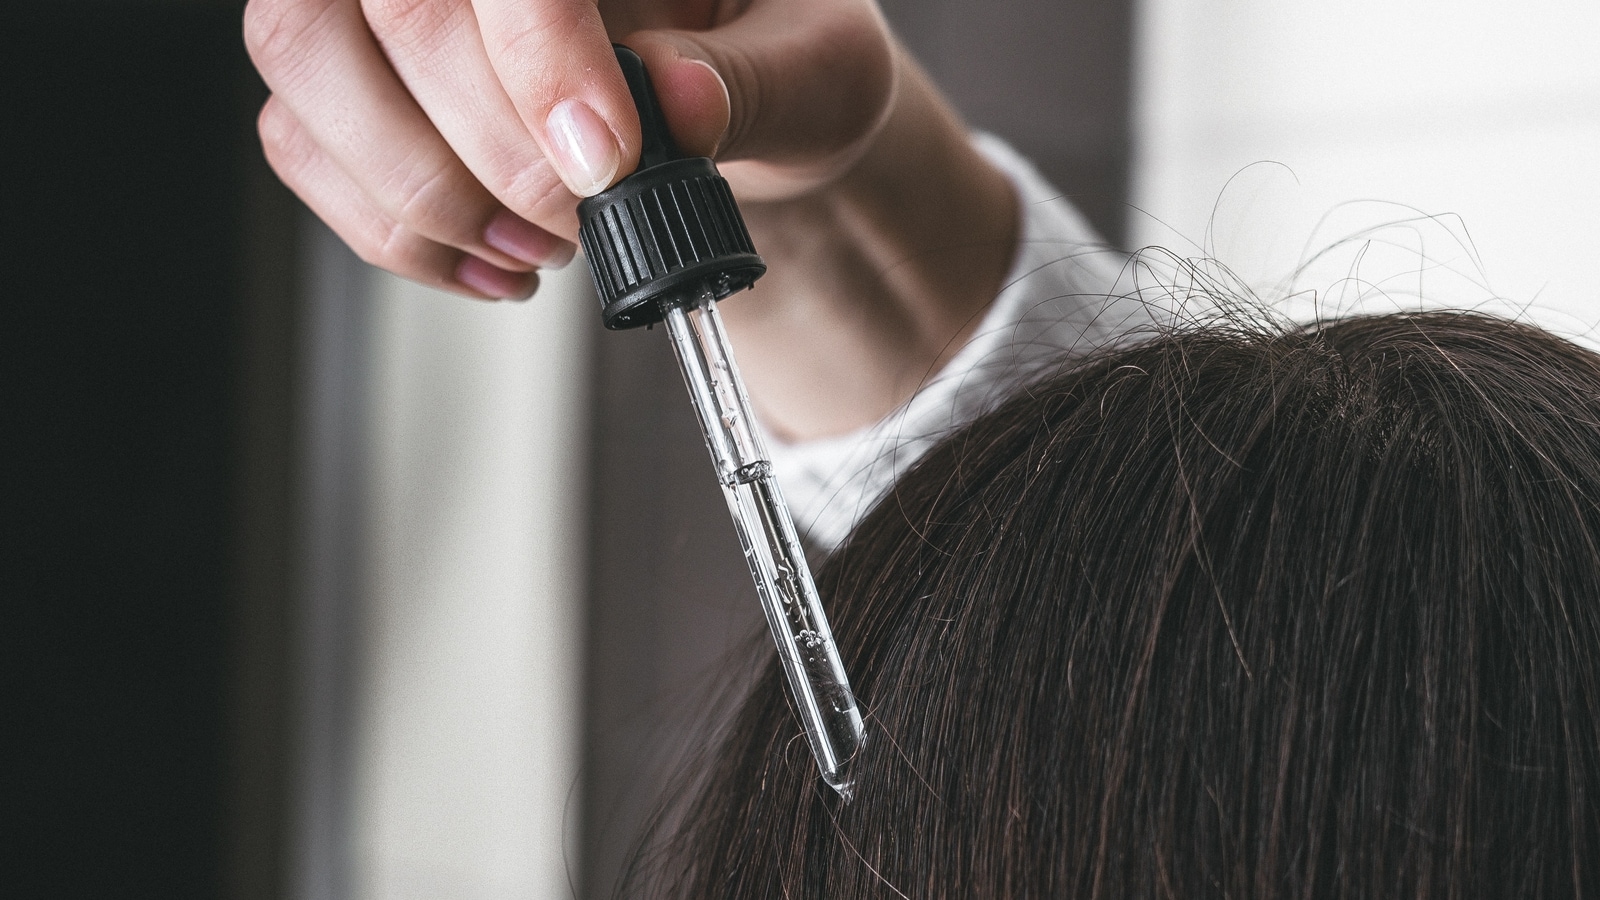 Hair growth serums: A sure shot way to gain volume and fight breakage